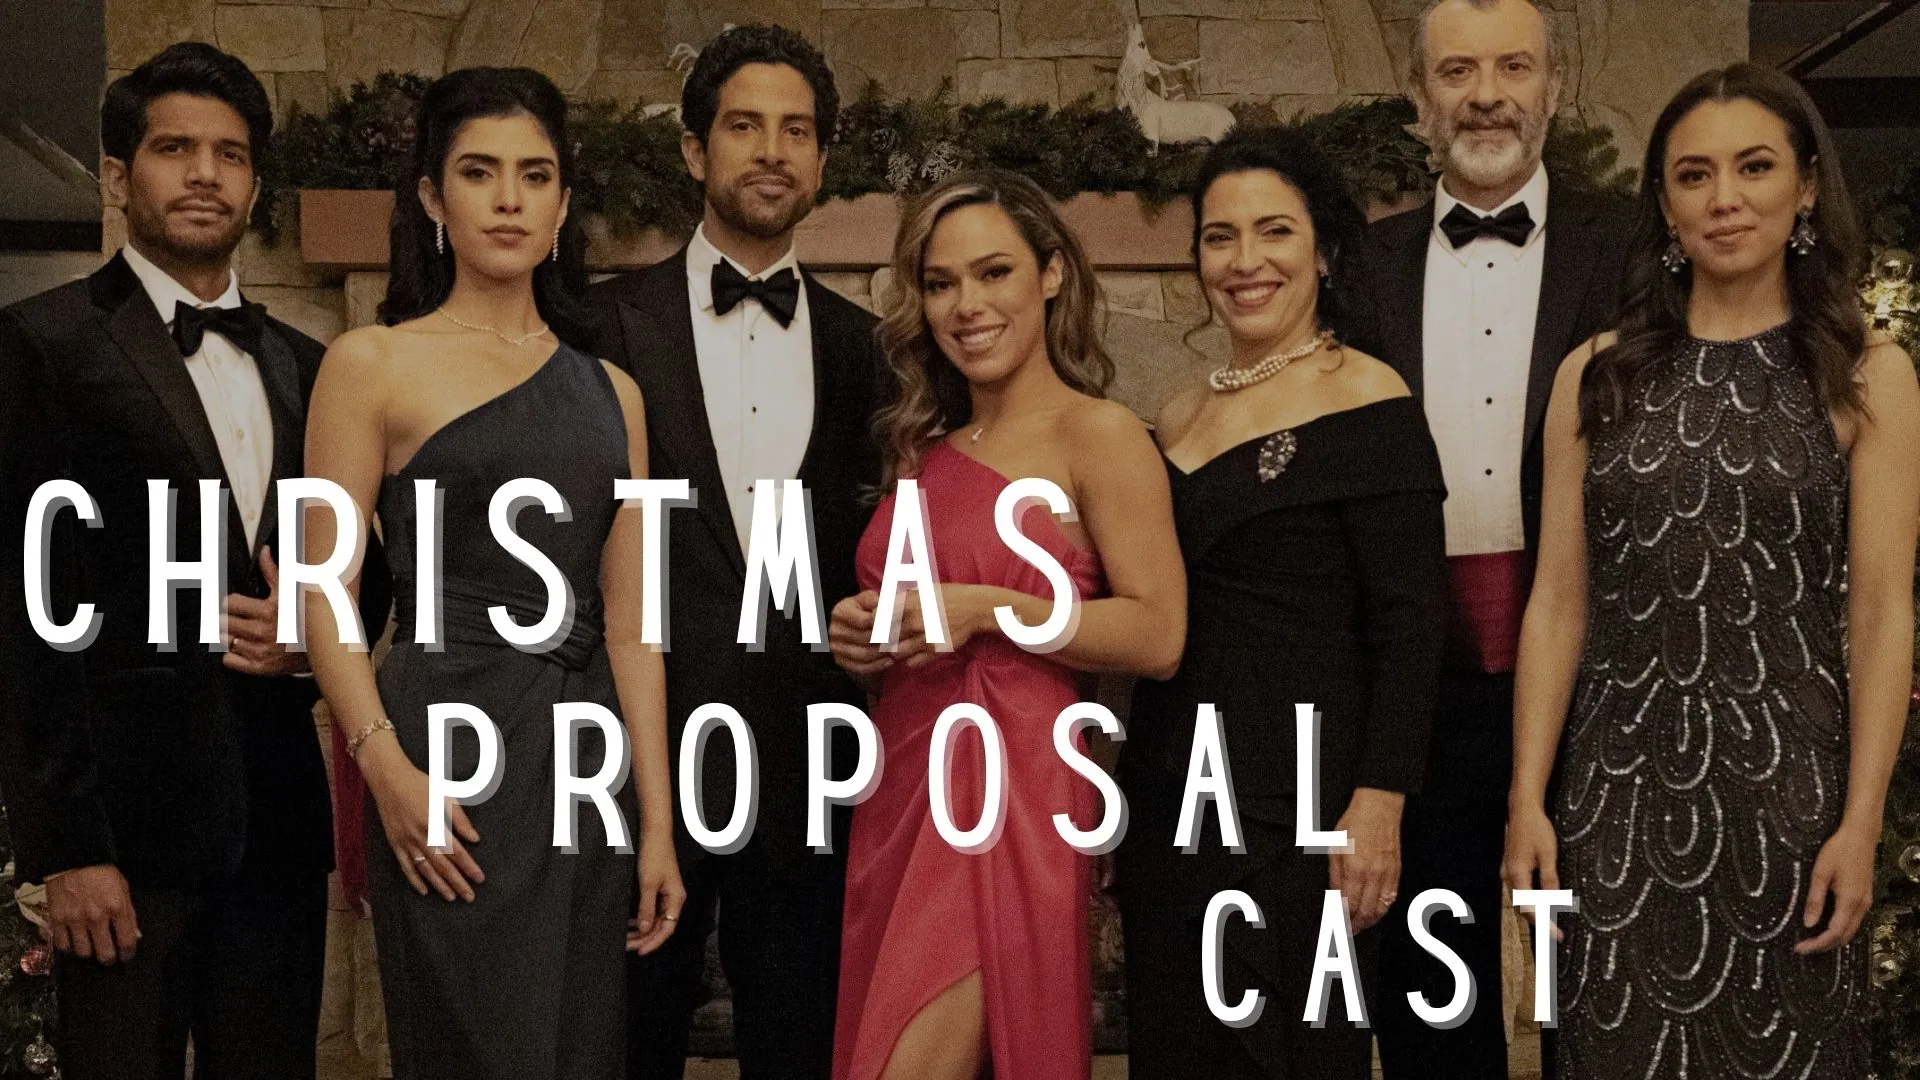 The Cast of Christmas Proposal